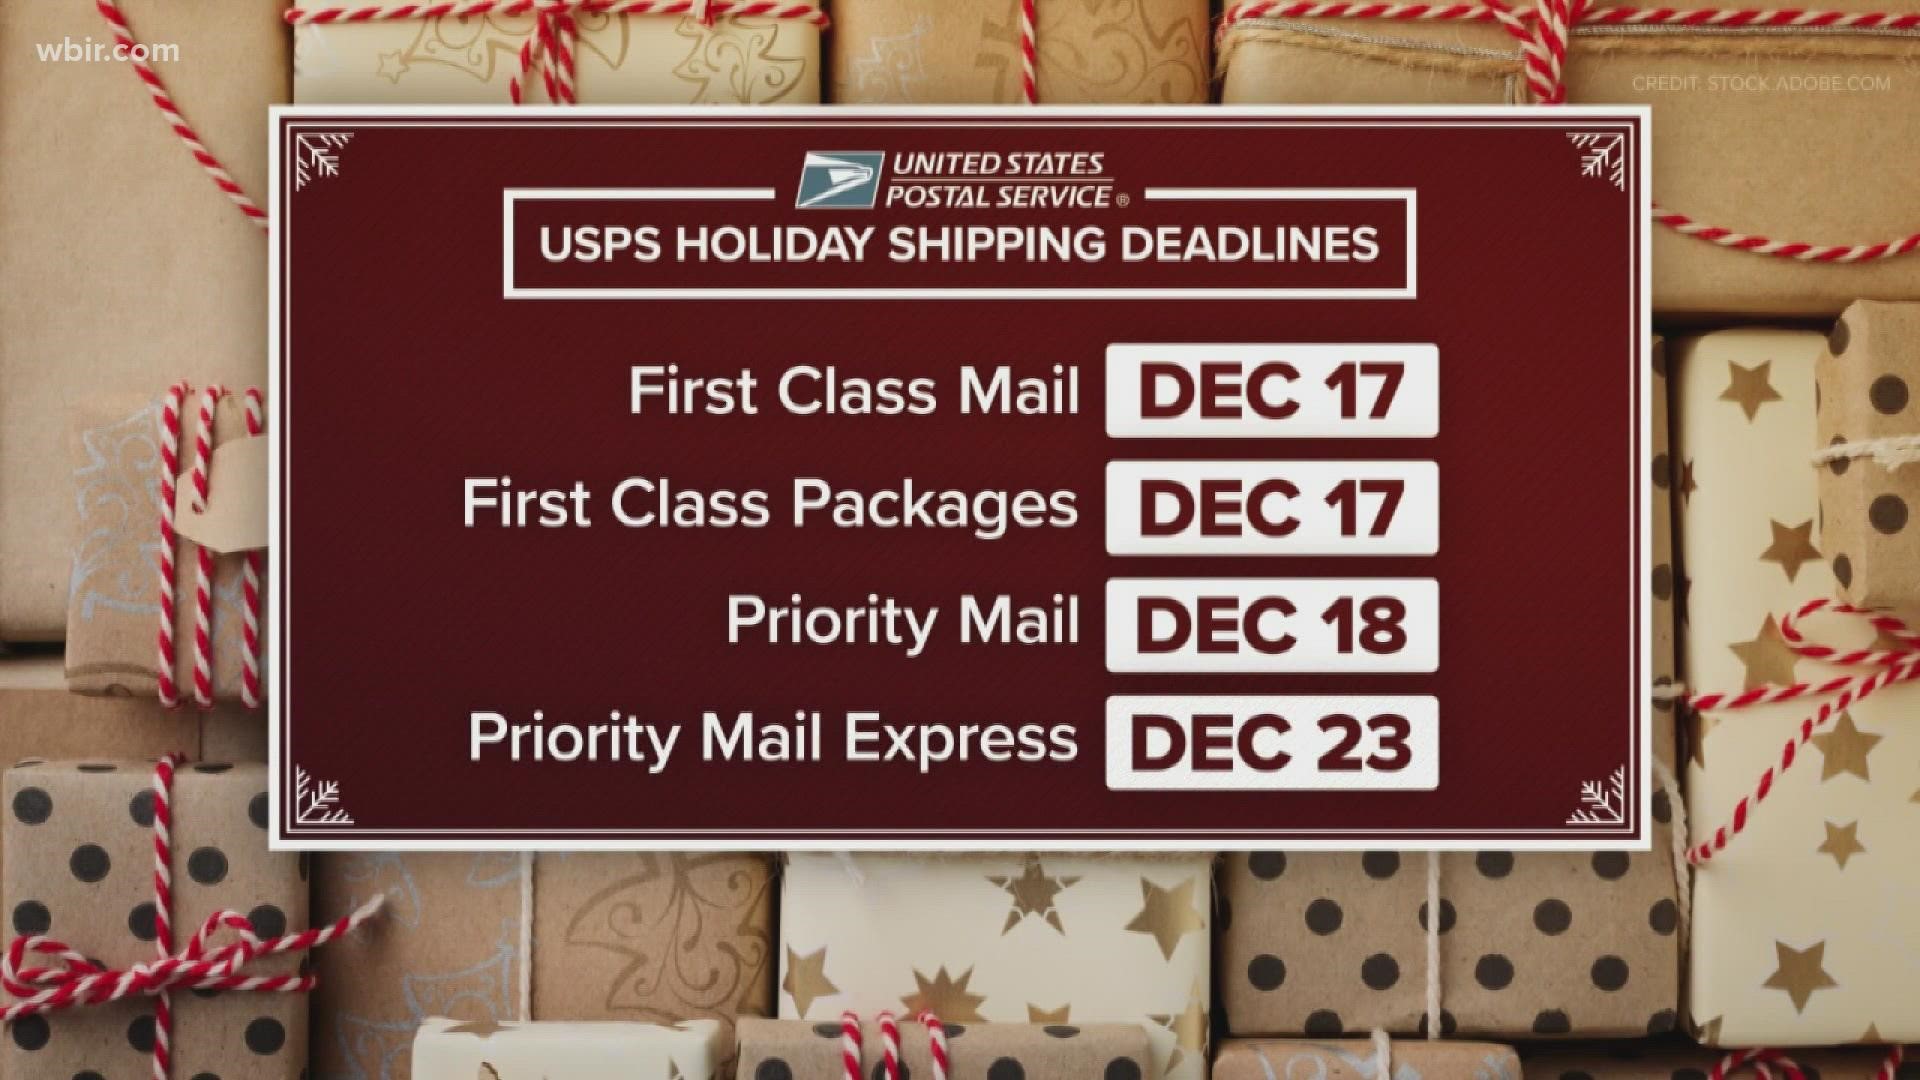 Trying to mail those gifts early?